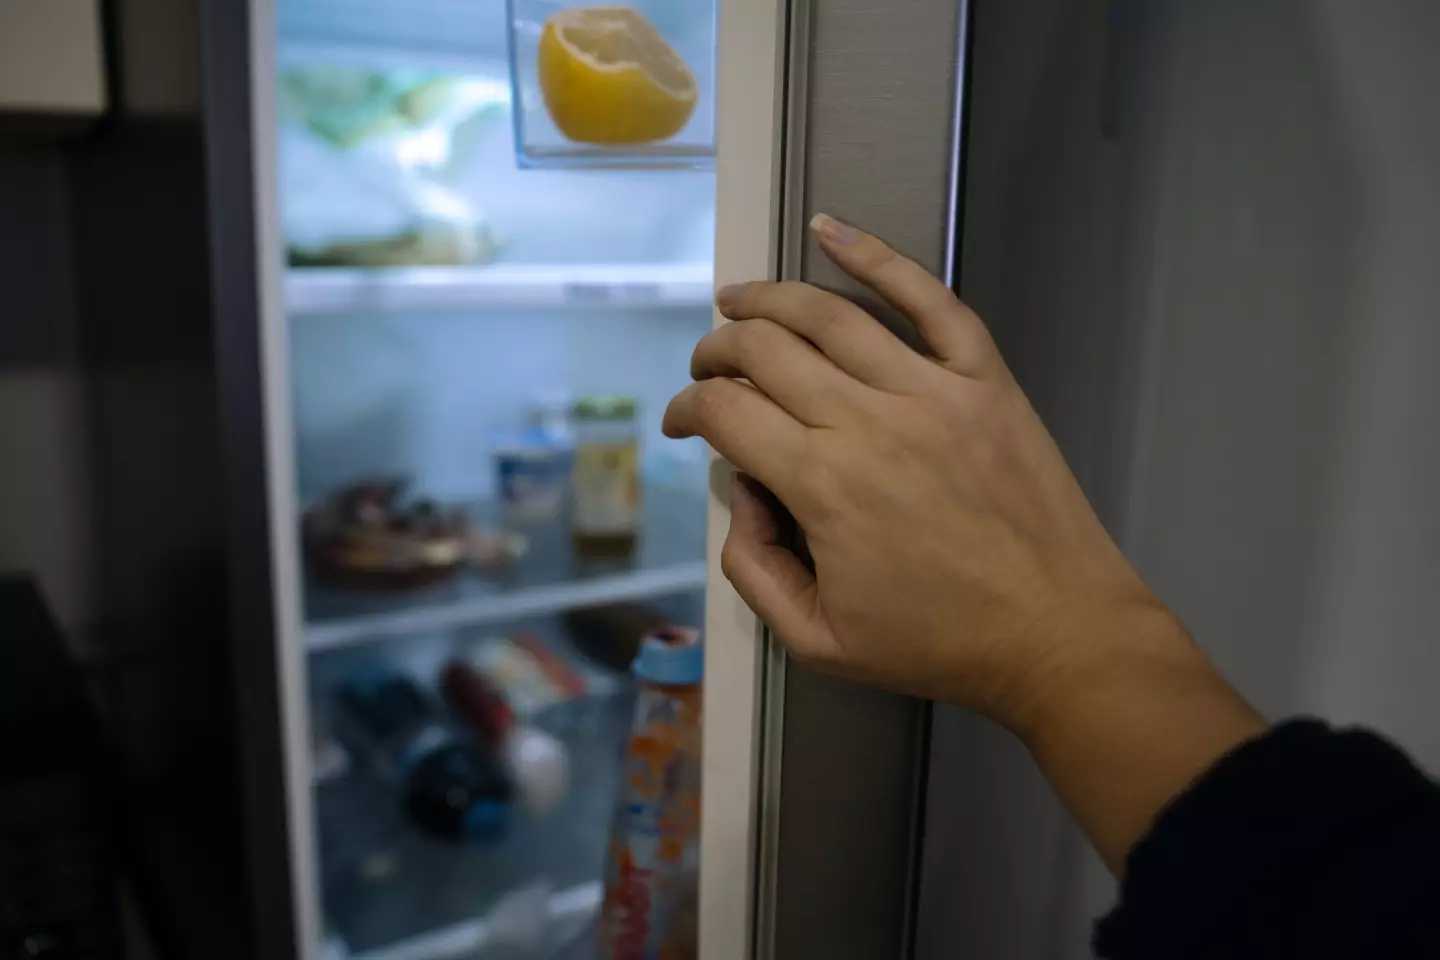 Is there something in your fridge that shouldn't be there?